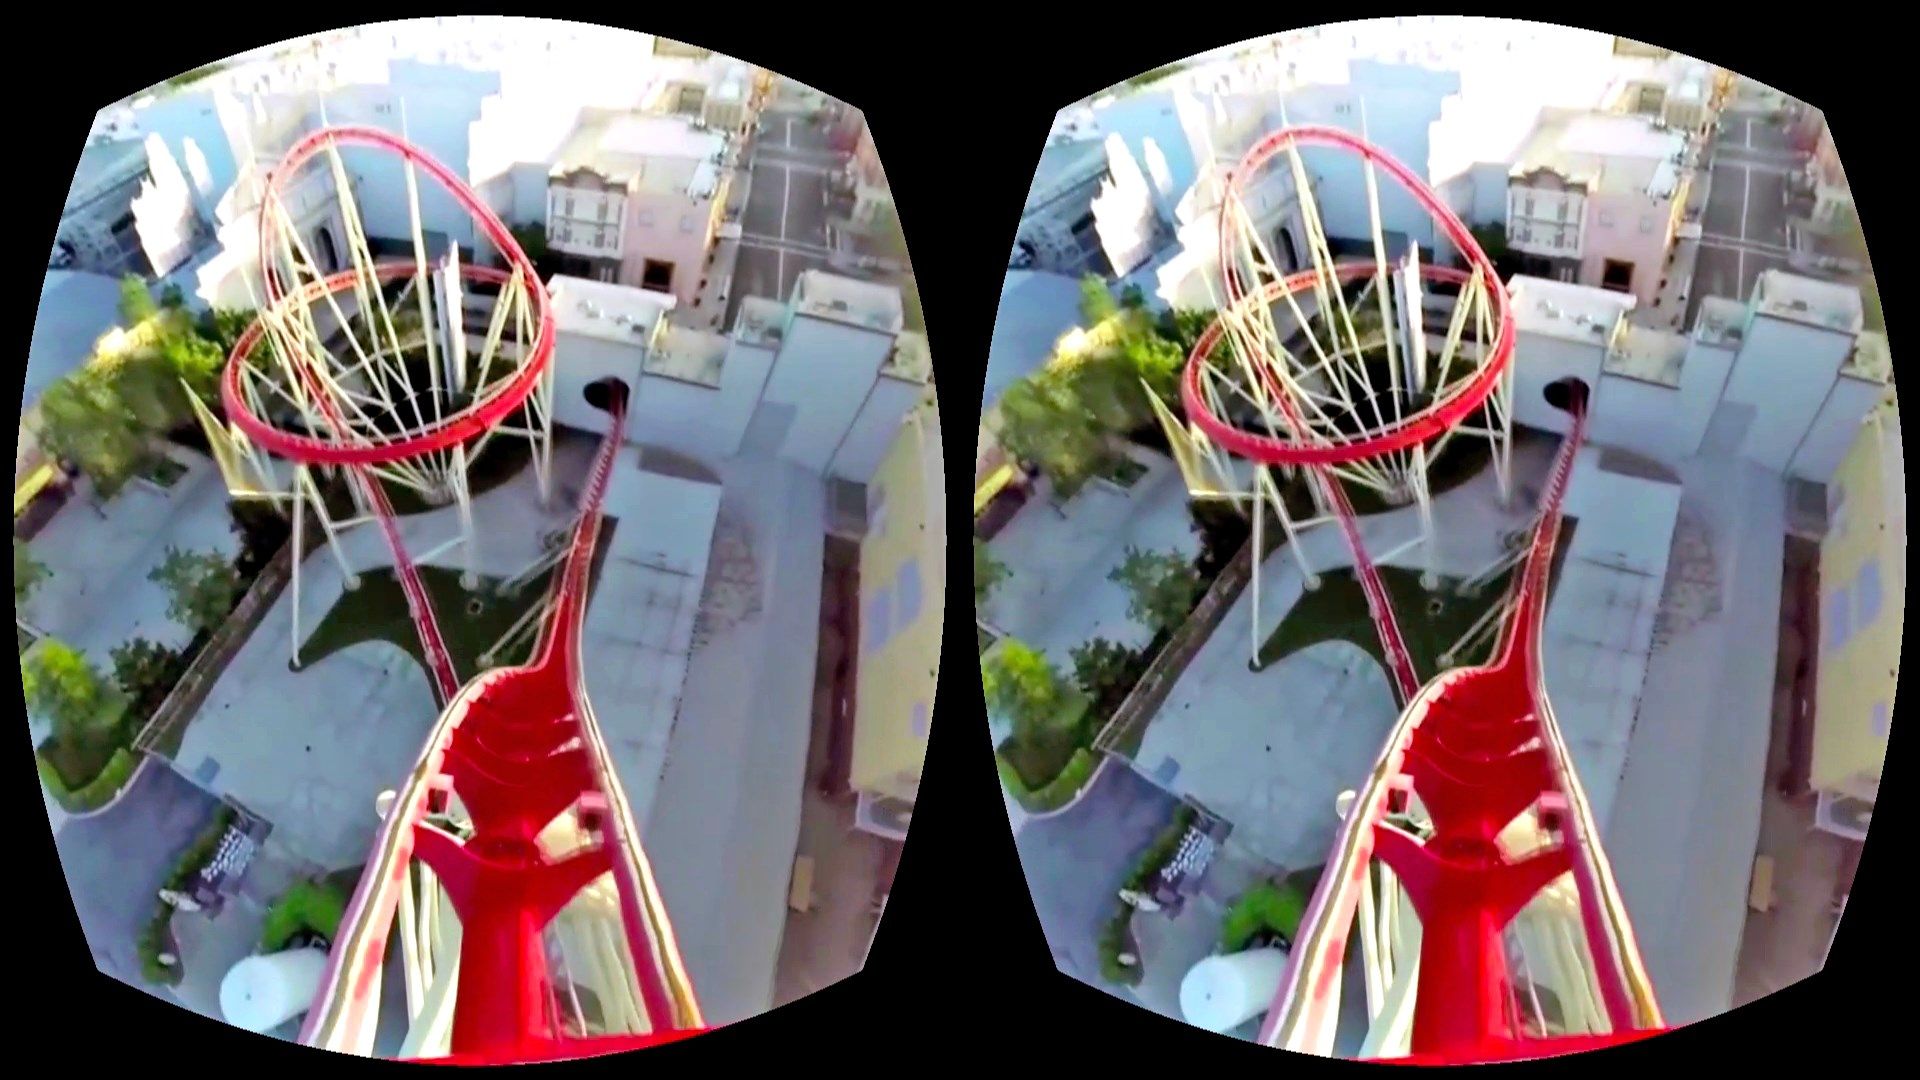 VR Headset view in a Rollercoaster